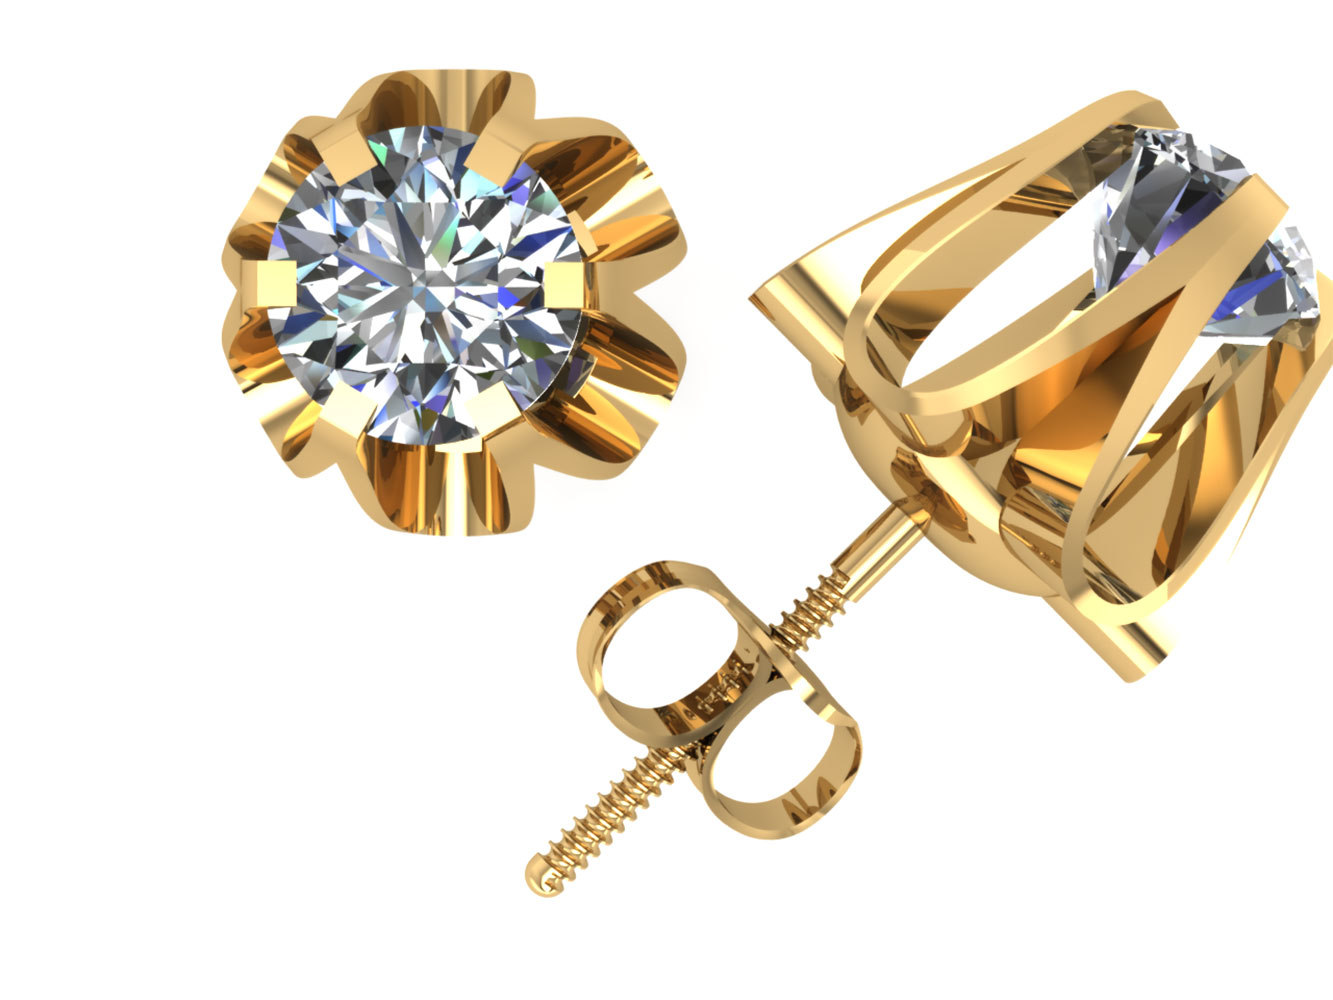 Jewel We Sell Genuine 1Ctw Round Cut Diamond Buttercup Stud Earrings 14k White or Yellow Gold 6Prong New H SI2